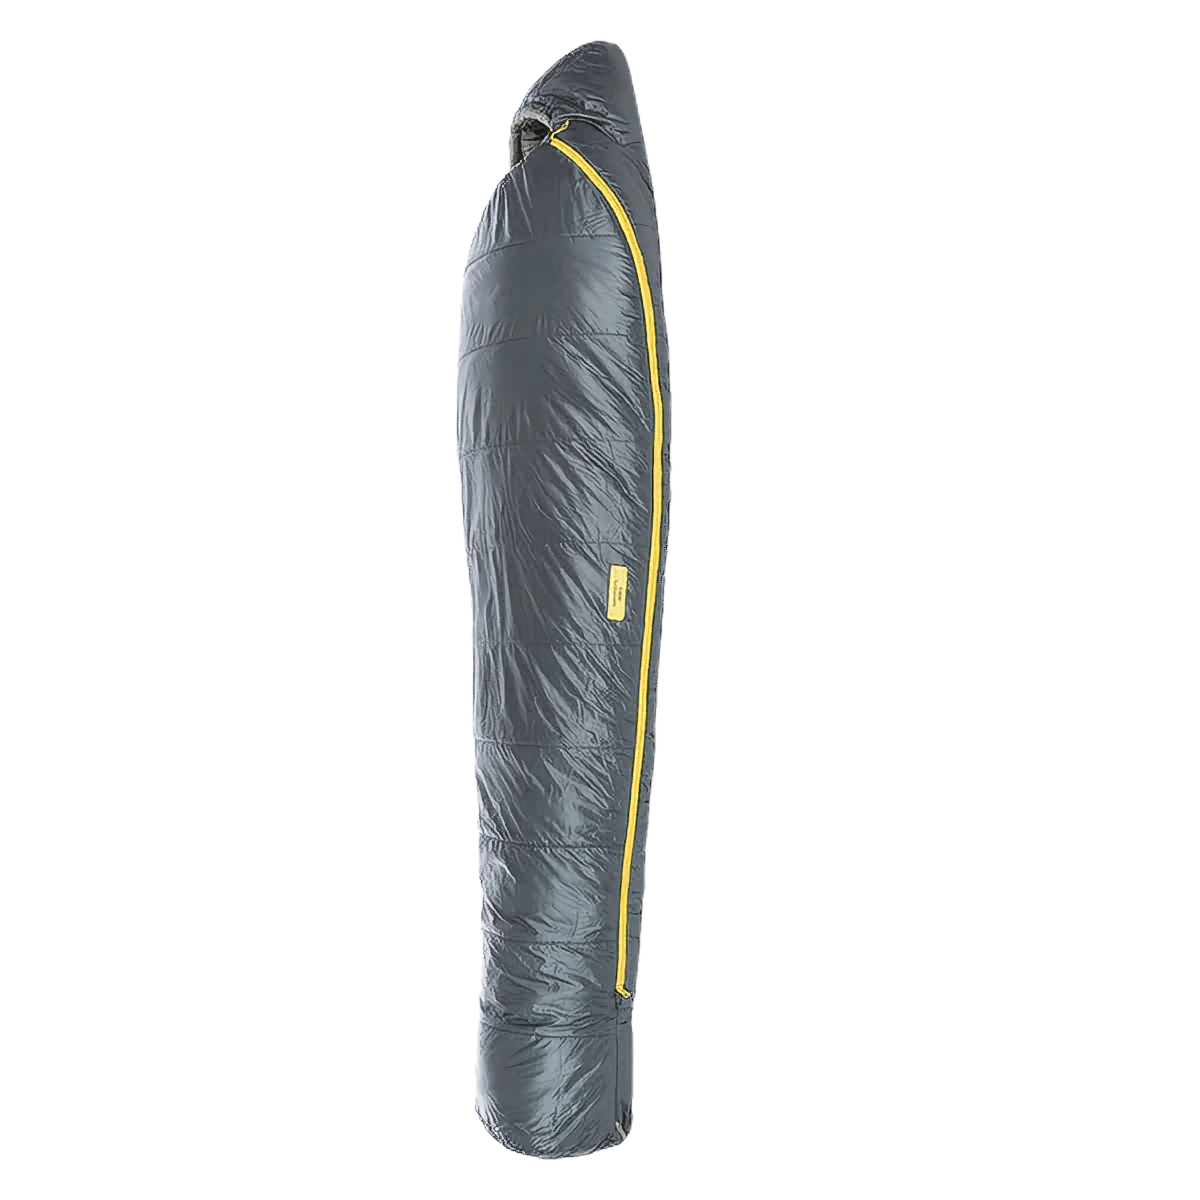  Big Agnes, Anthracite Sleeping Bag, 20 Degree, (FireLine Pro  Recycled), Slate, Long, Left Zip : Sports & Outdoors